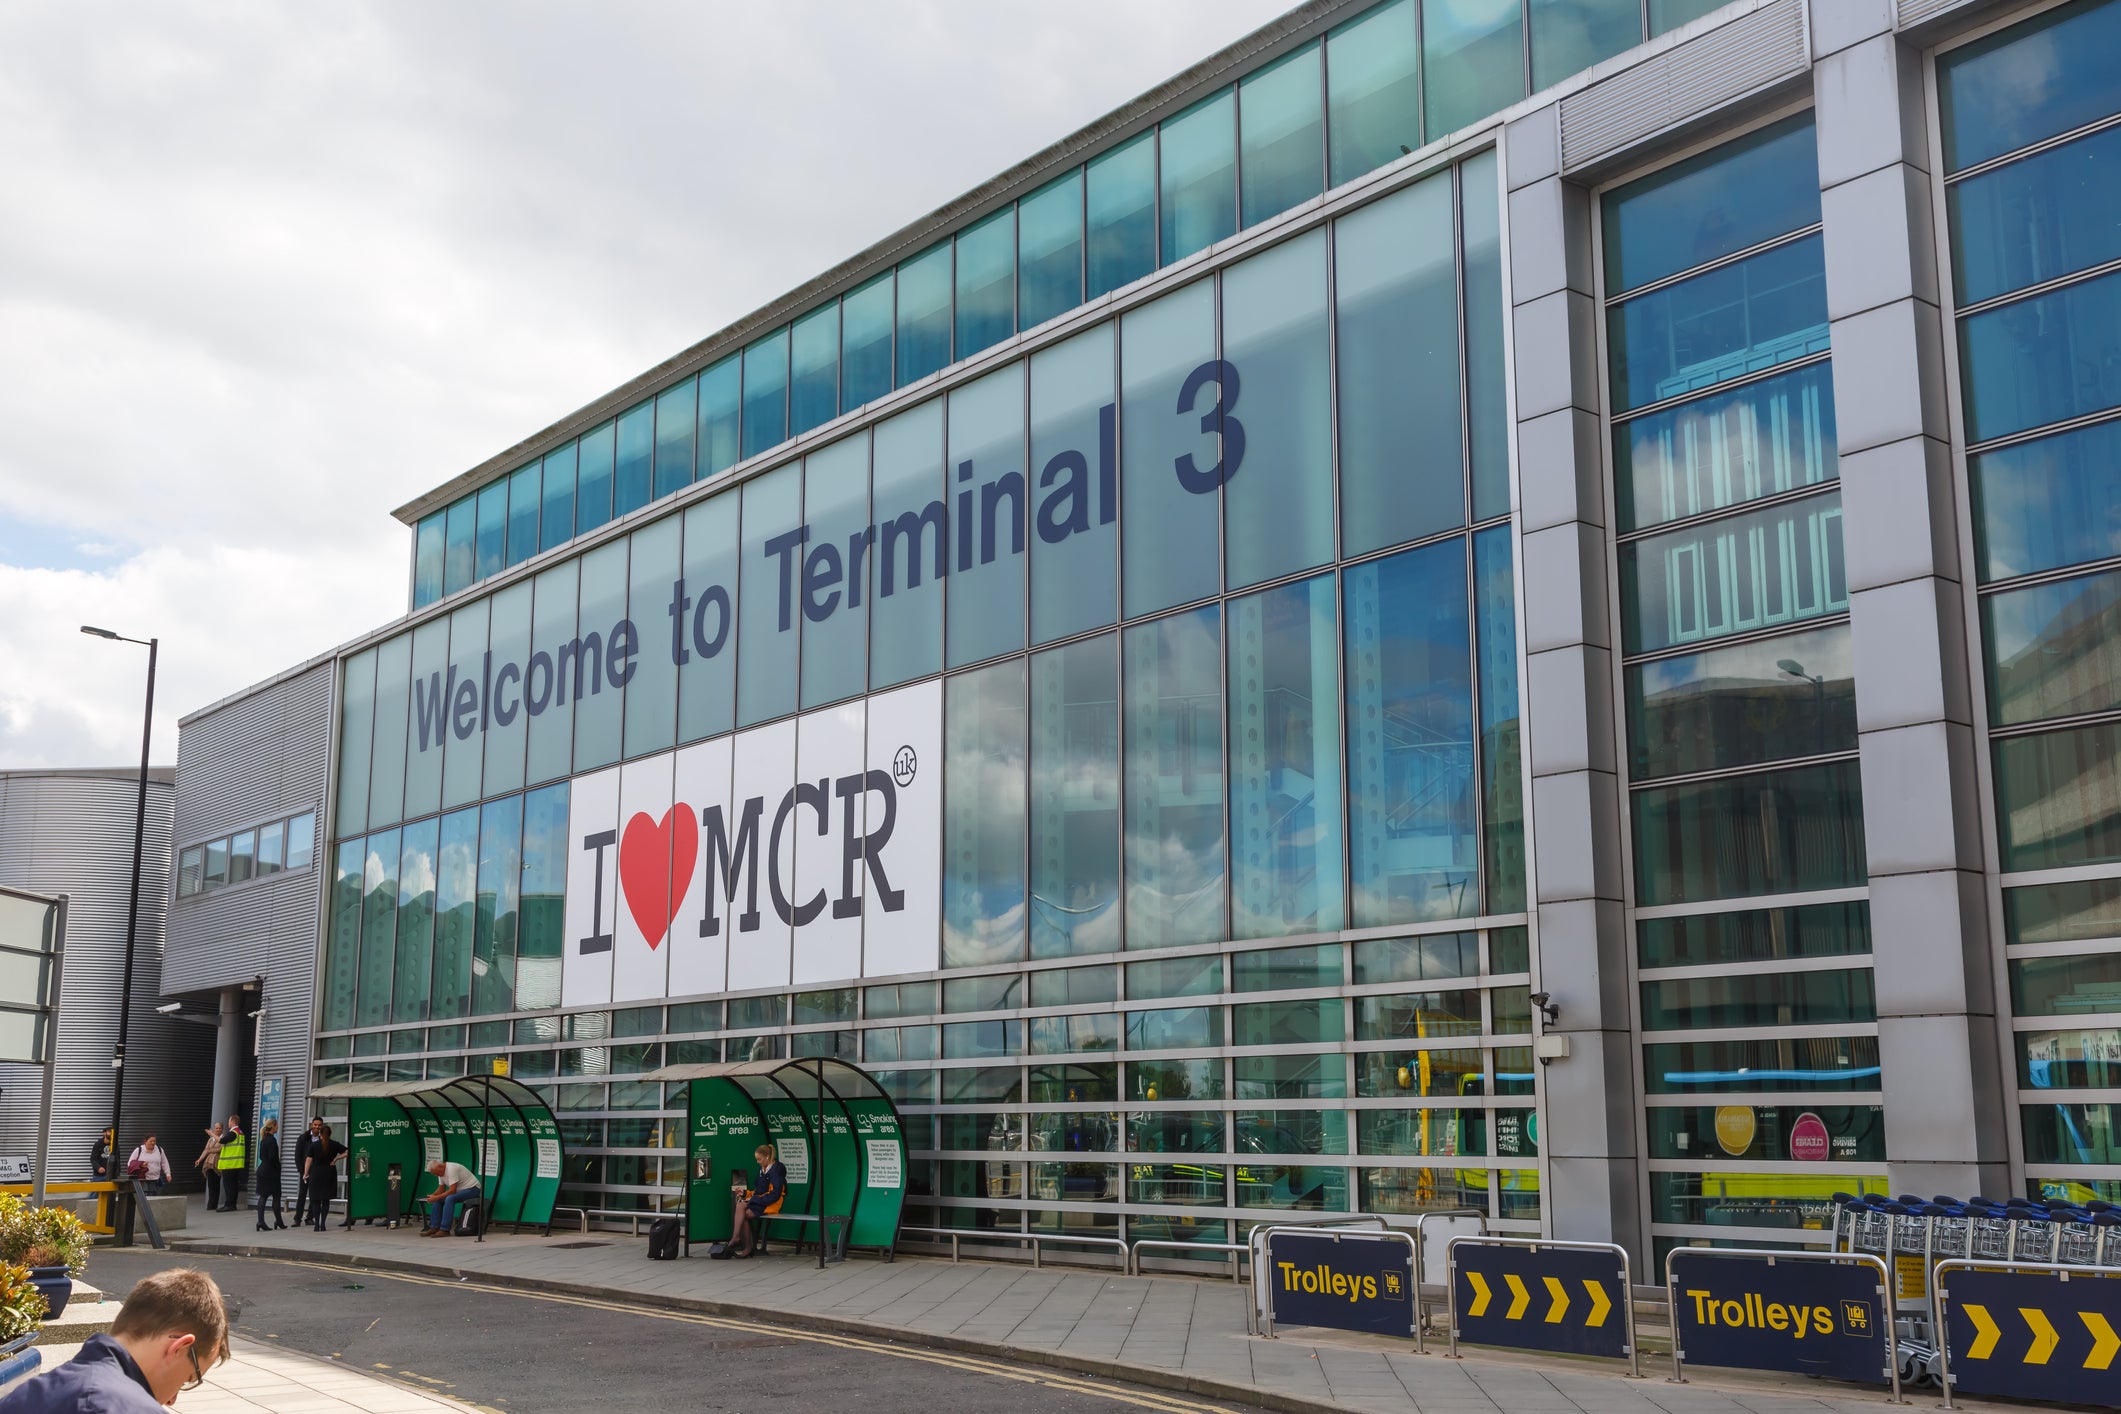 The incident occurred at Manchester Airport